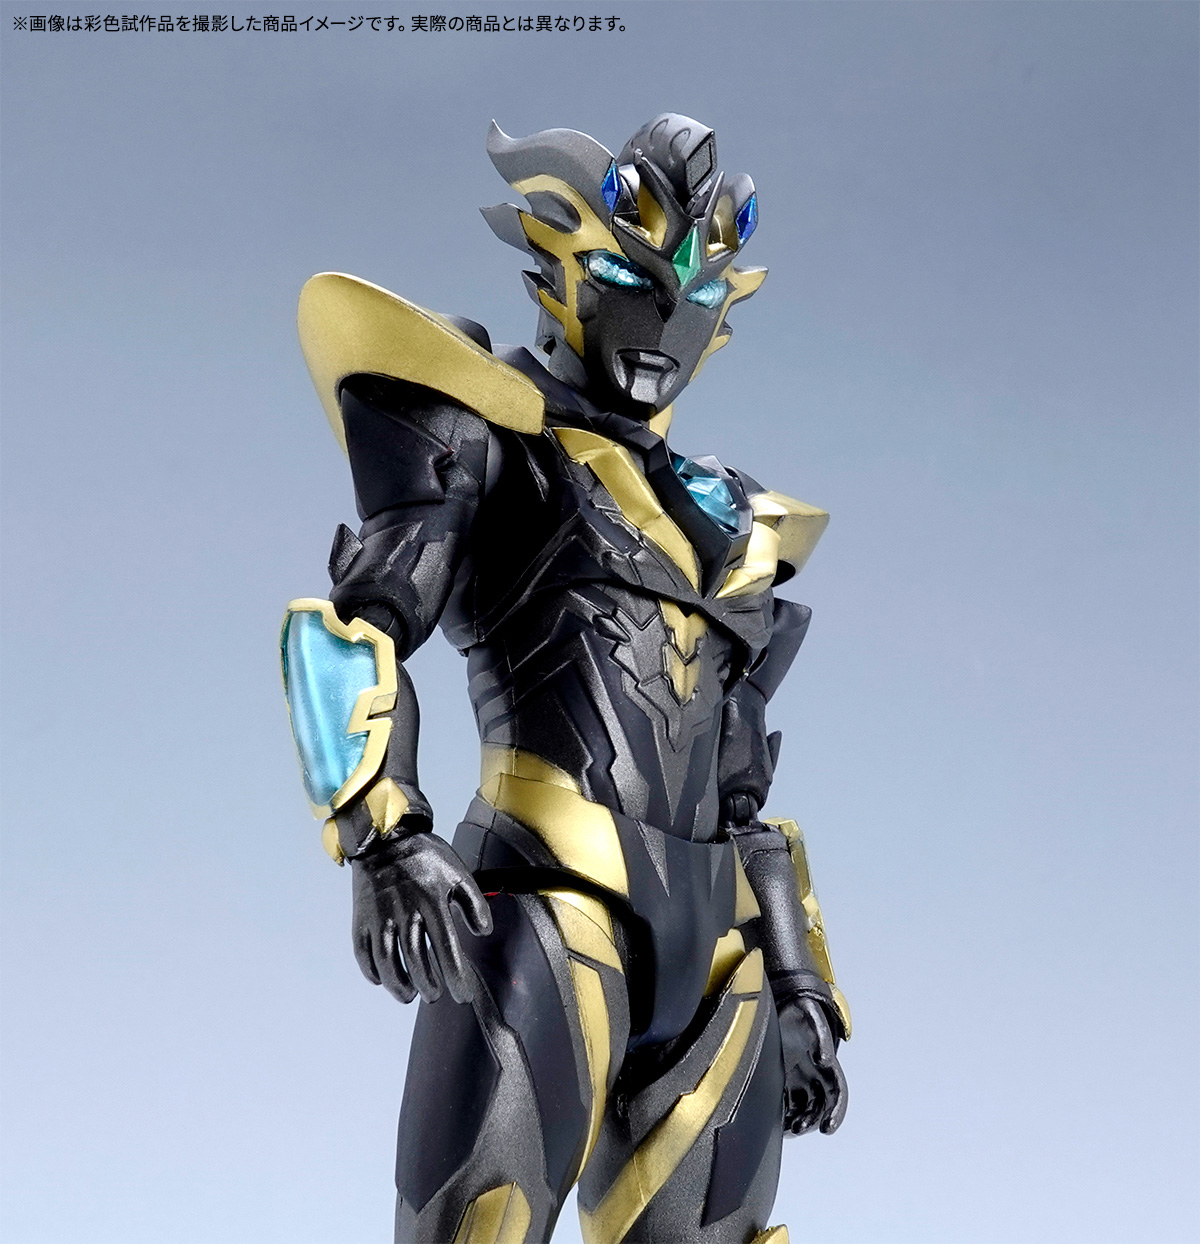 Ultra awesome power! Intoducing S.H.Figuarts ULTRAMAN Z DEATHCIUM RISE CLAW!